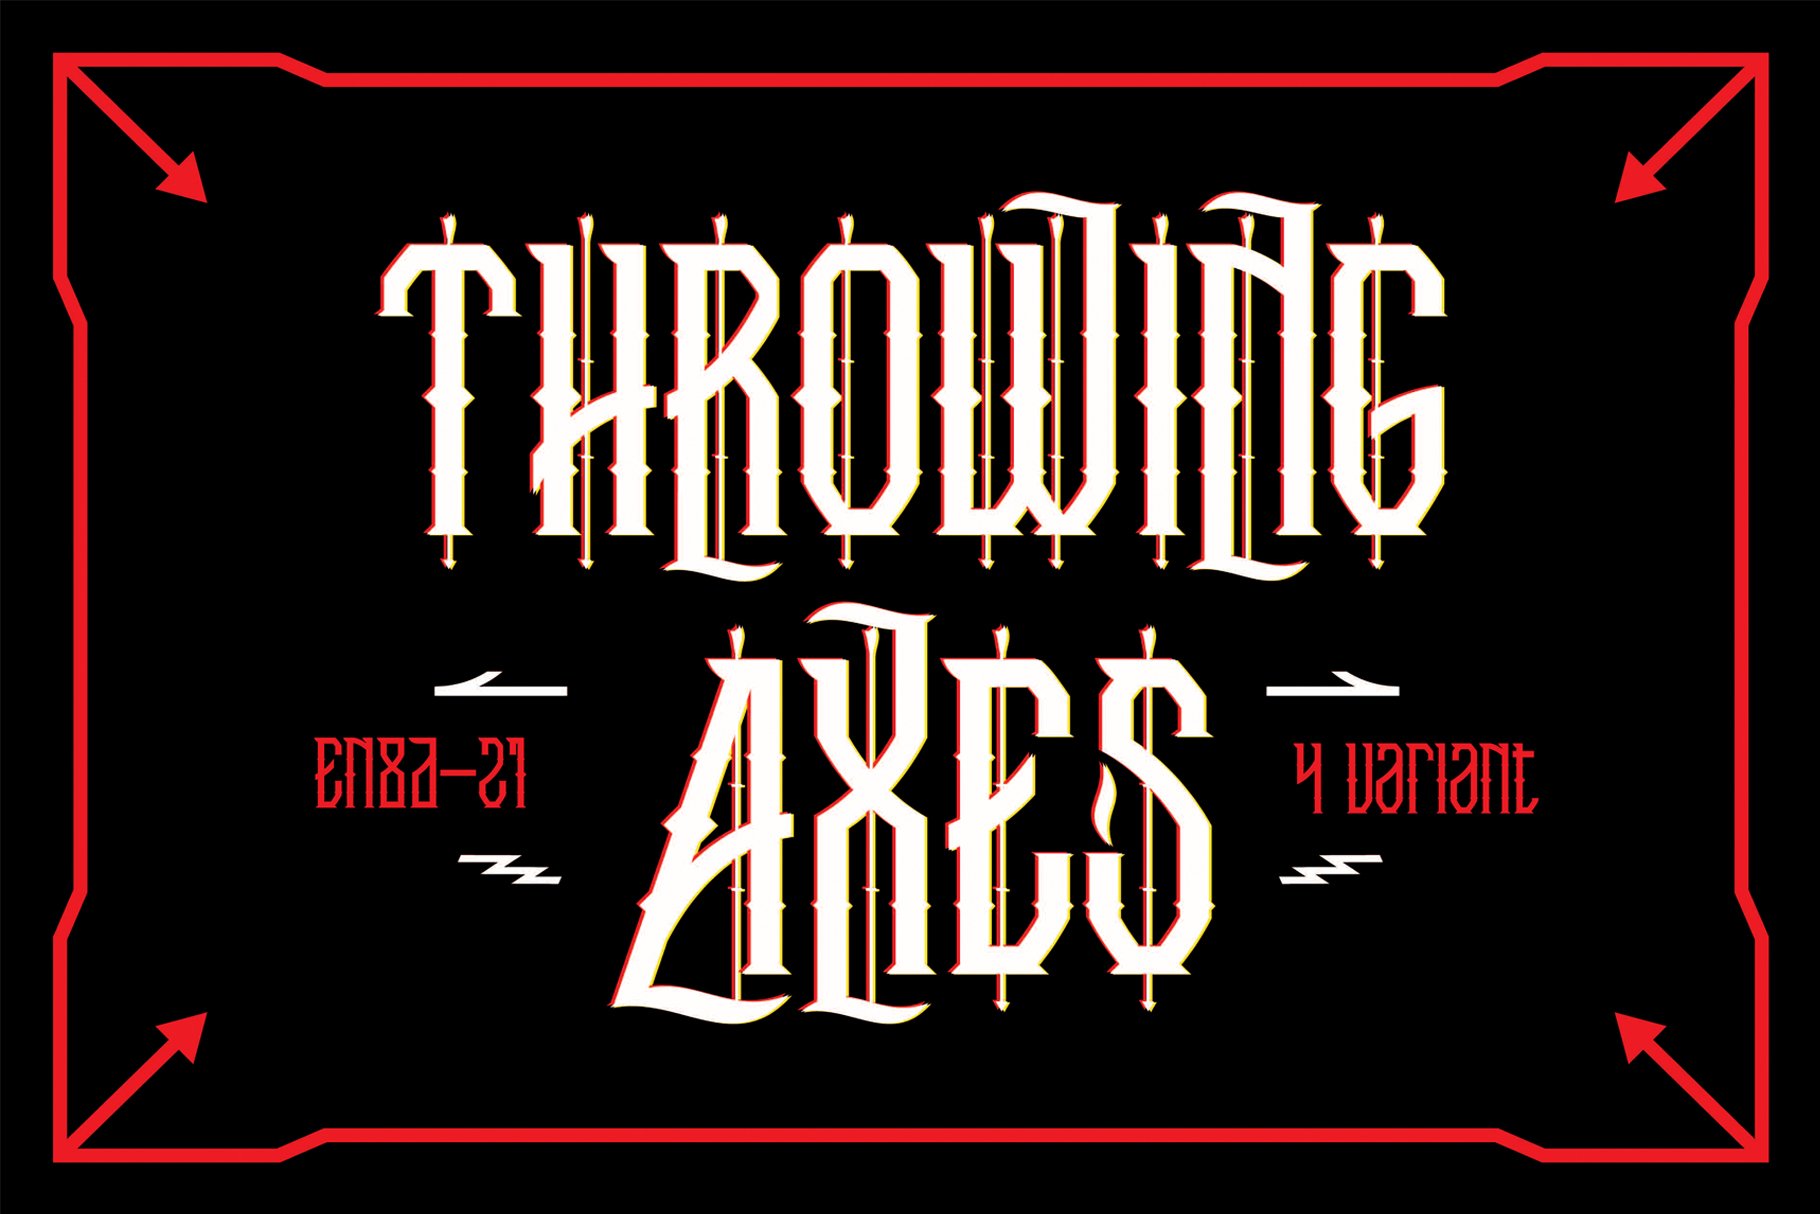 Trowing Axes cover image.